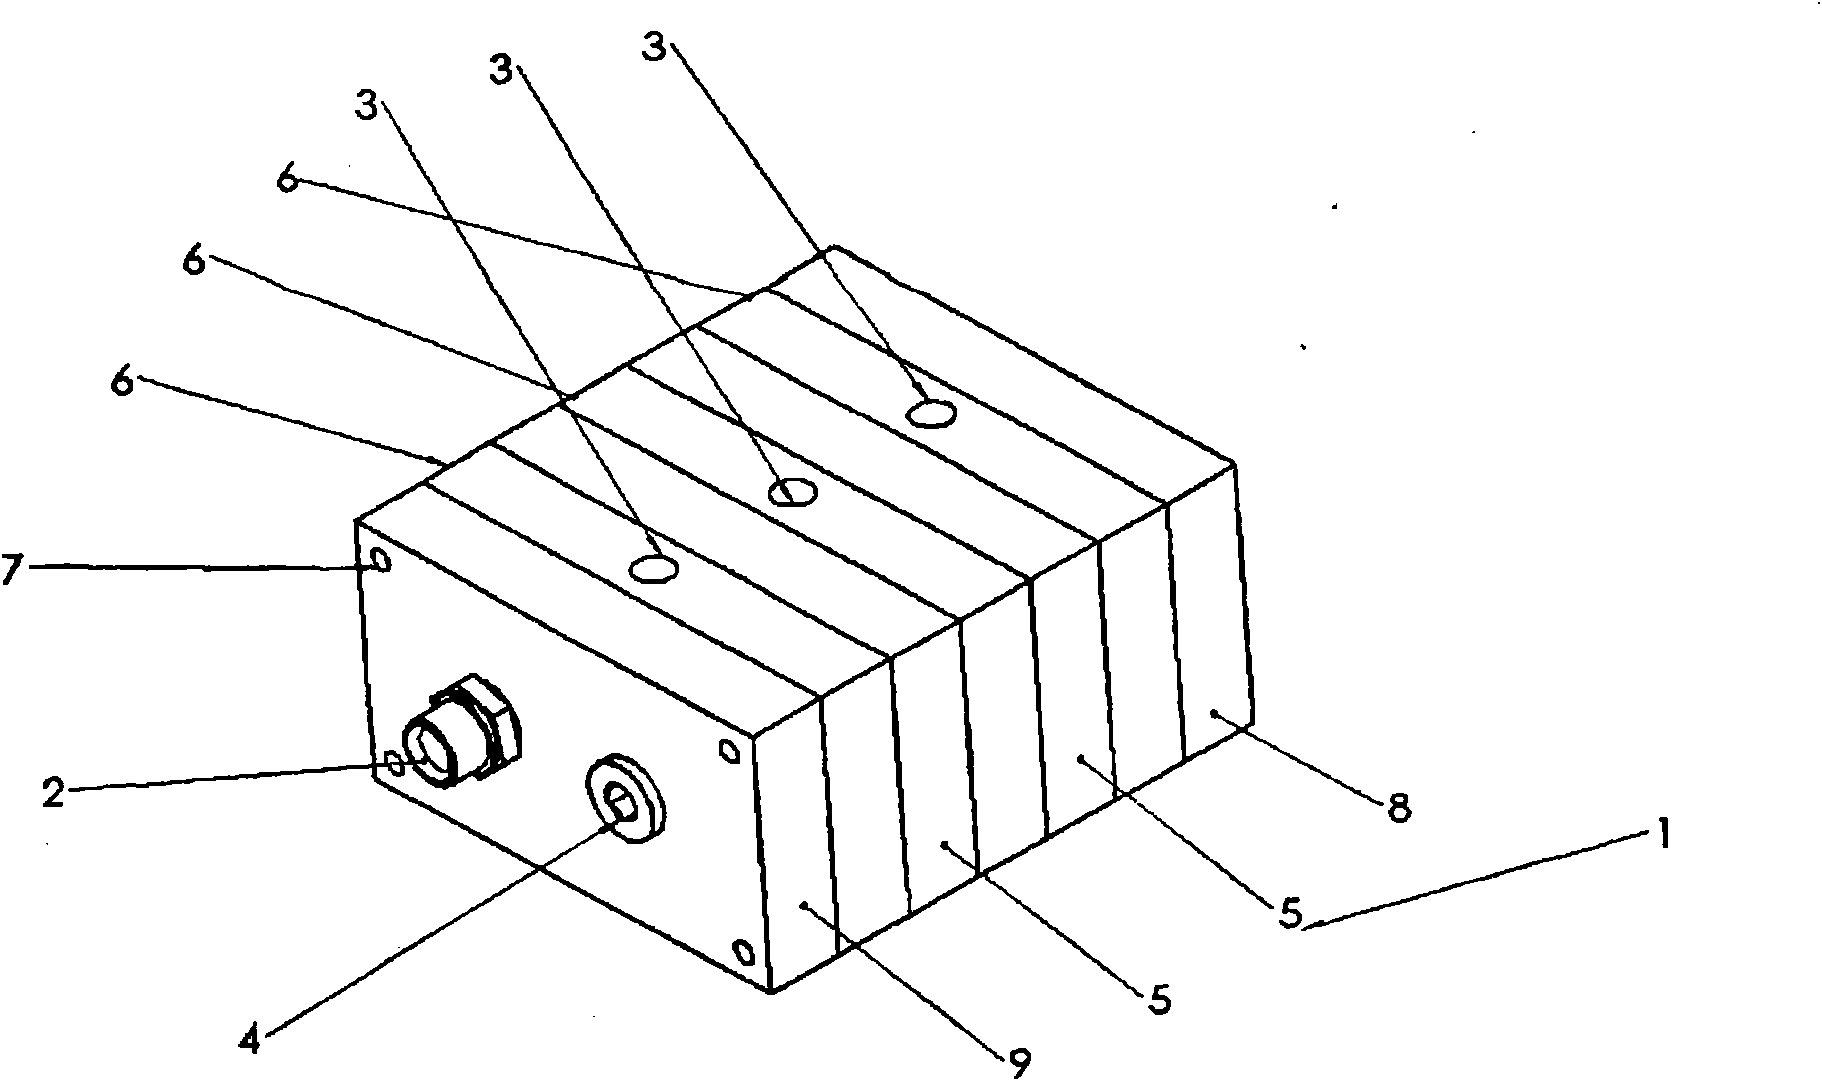 Device for dividing a flow equally between two or more objects